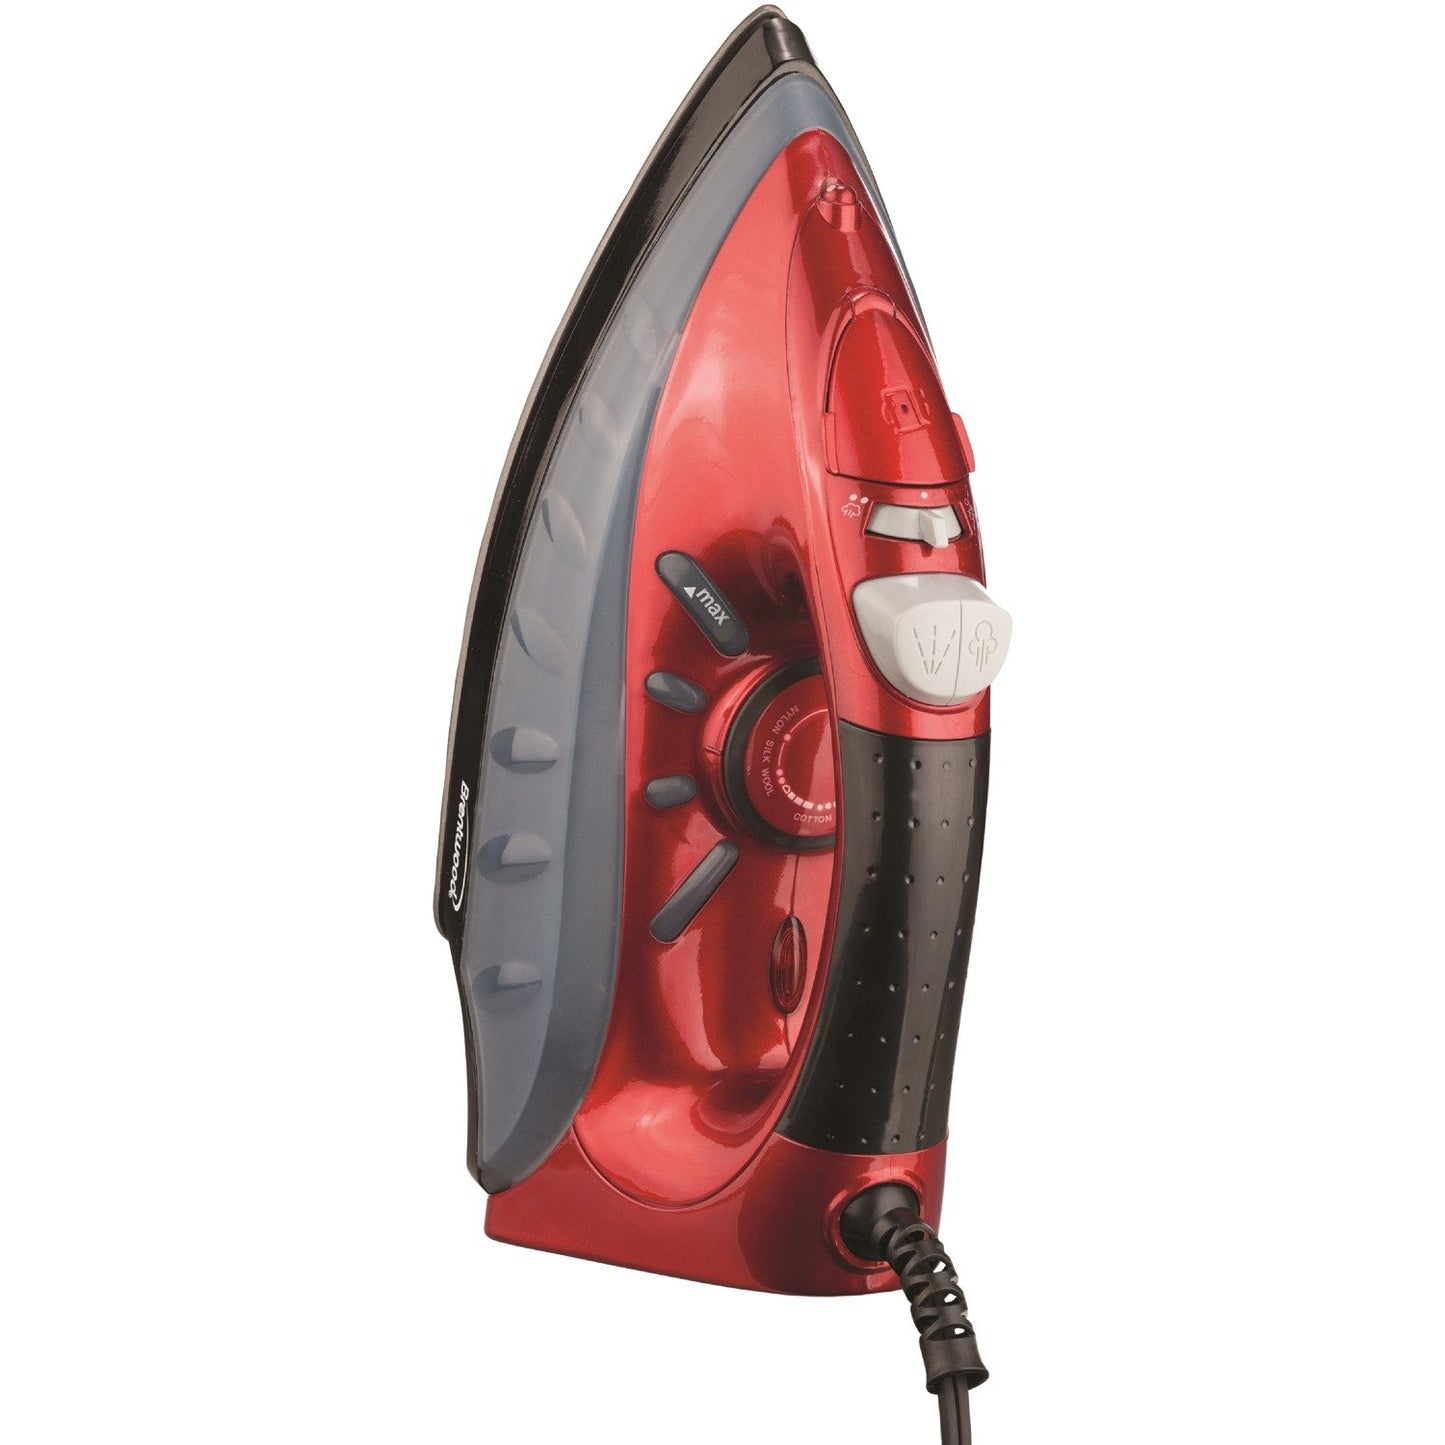 Brentwood Appl. MPI-61 Full-Size Nonstick Steam Iron (Red)